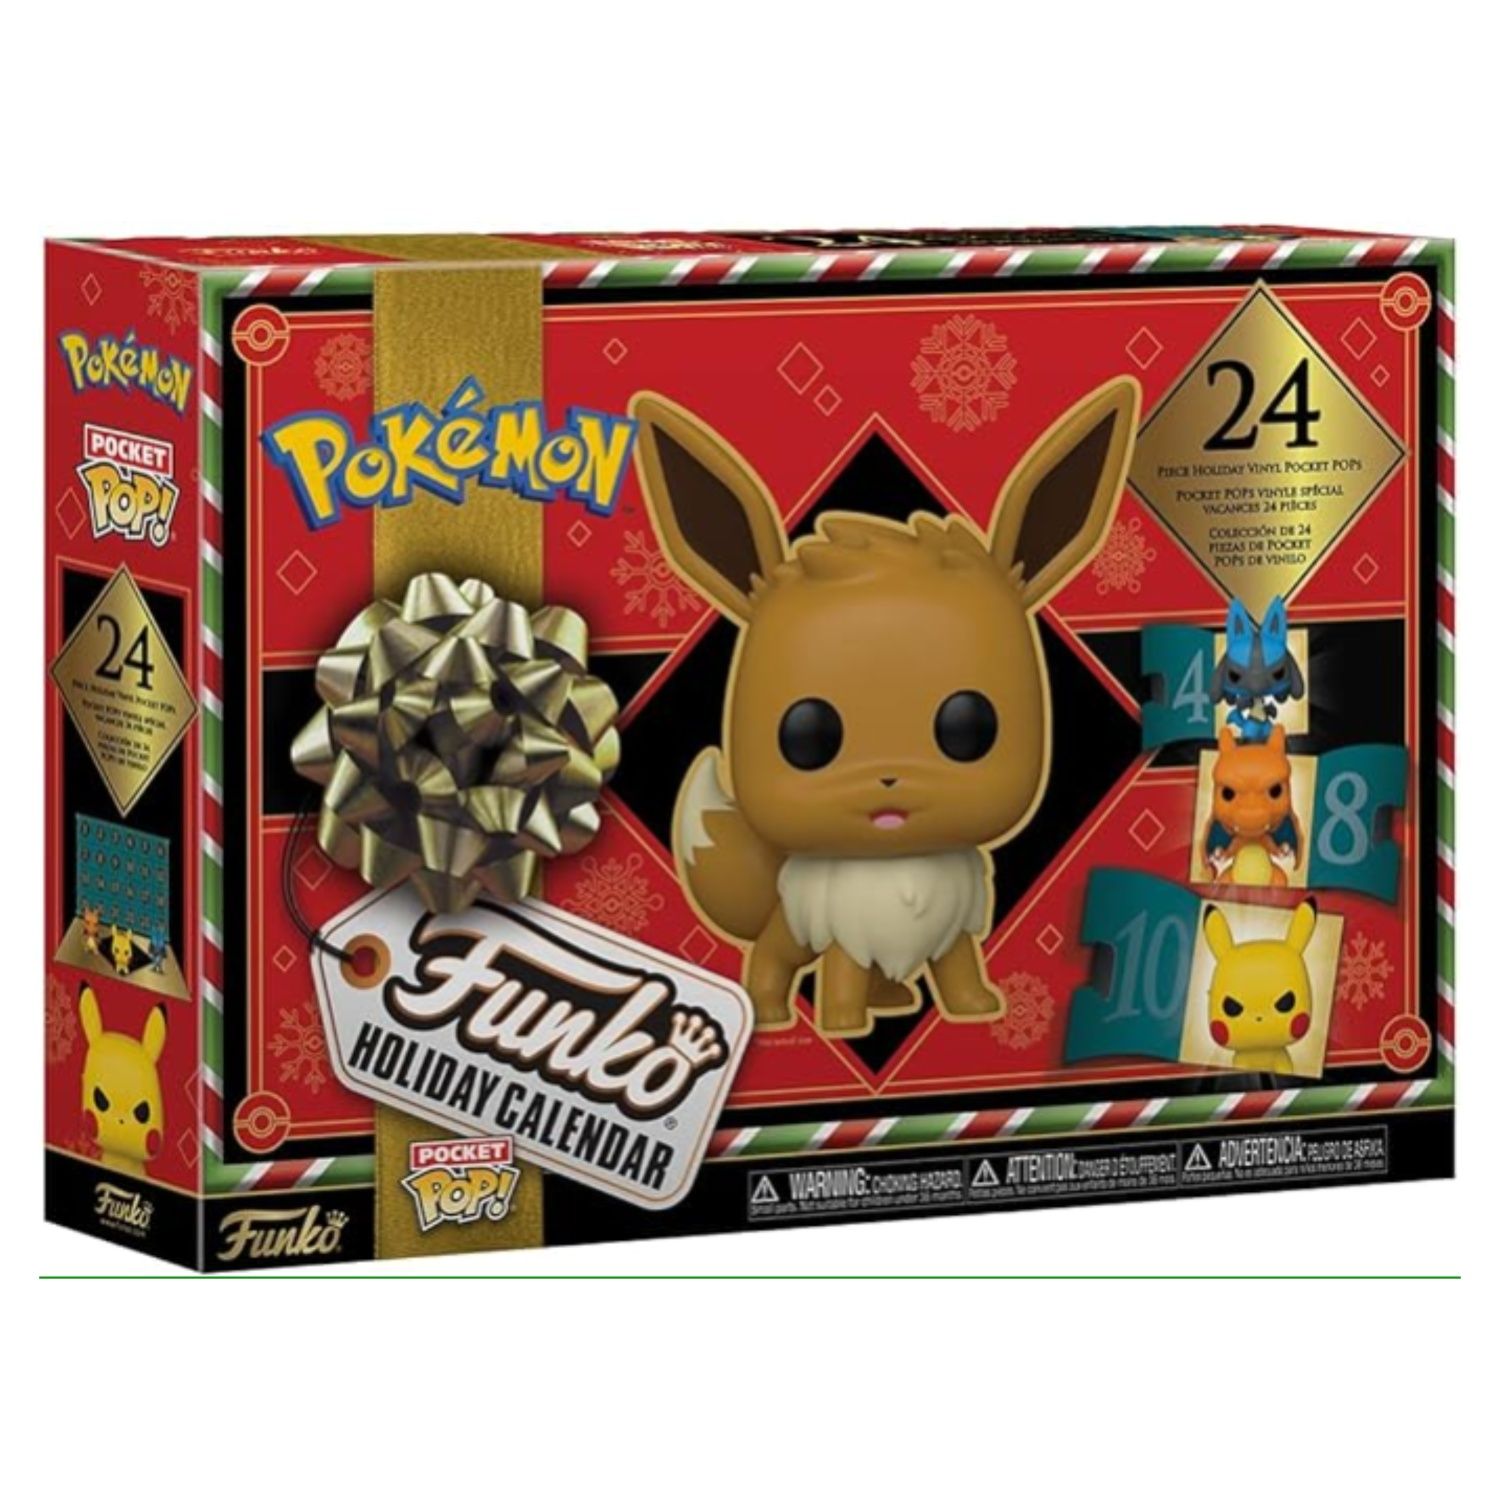 This product is a box with Pokémon printed on and features 24 miniatures